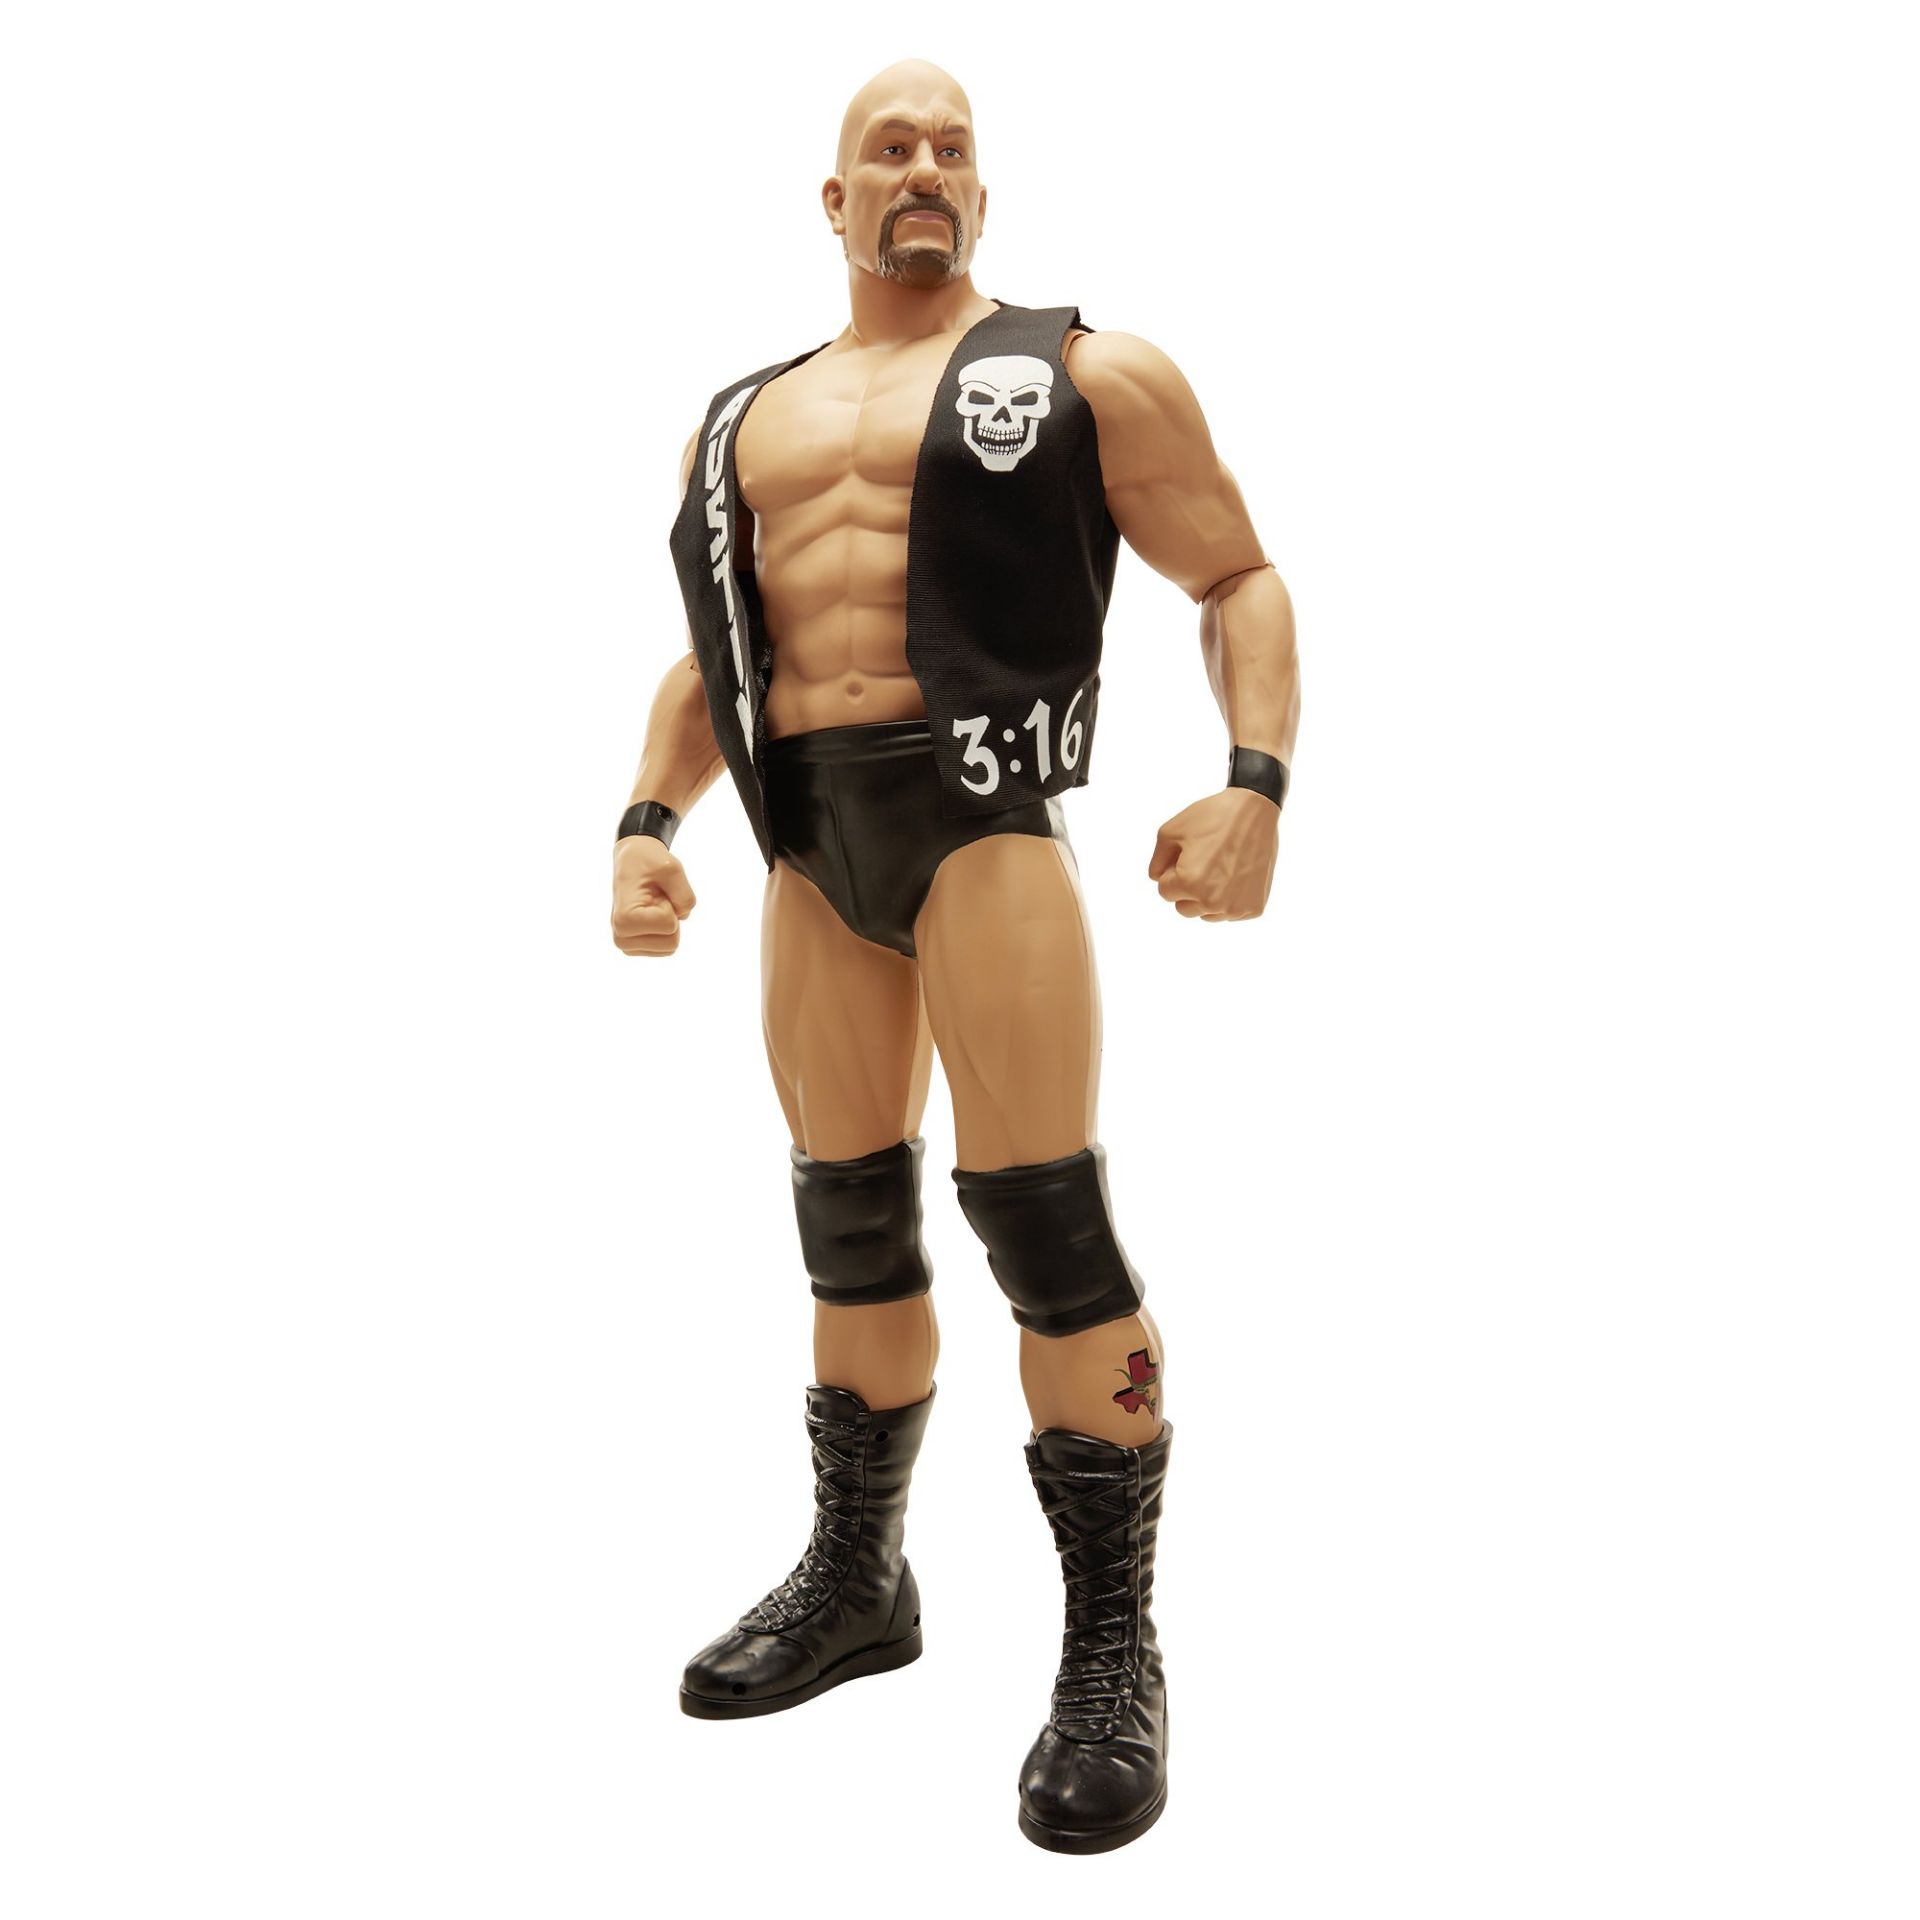 V Brand New Massive 31" WWE Stone Cold Steve Austin Action Figures - 3count.co.uk Price £28.99 - 8 - Image 3 of 4